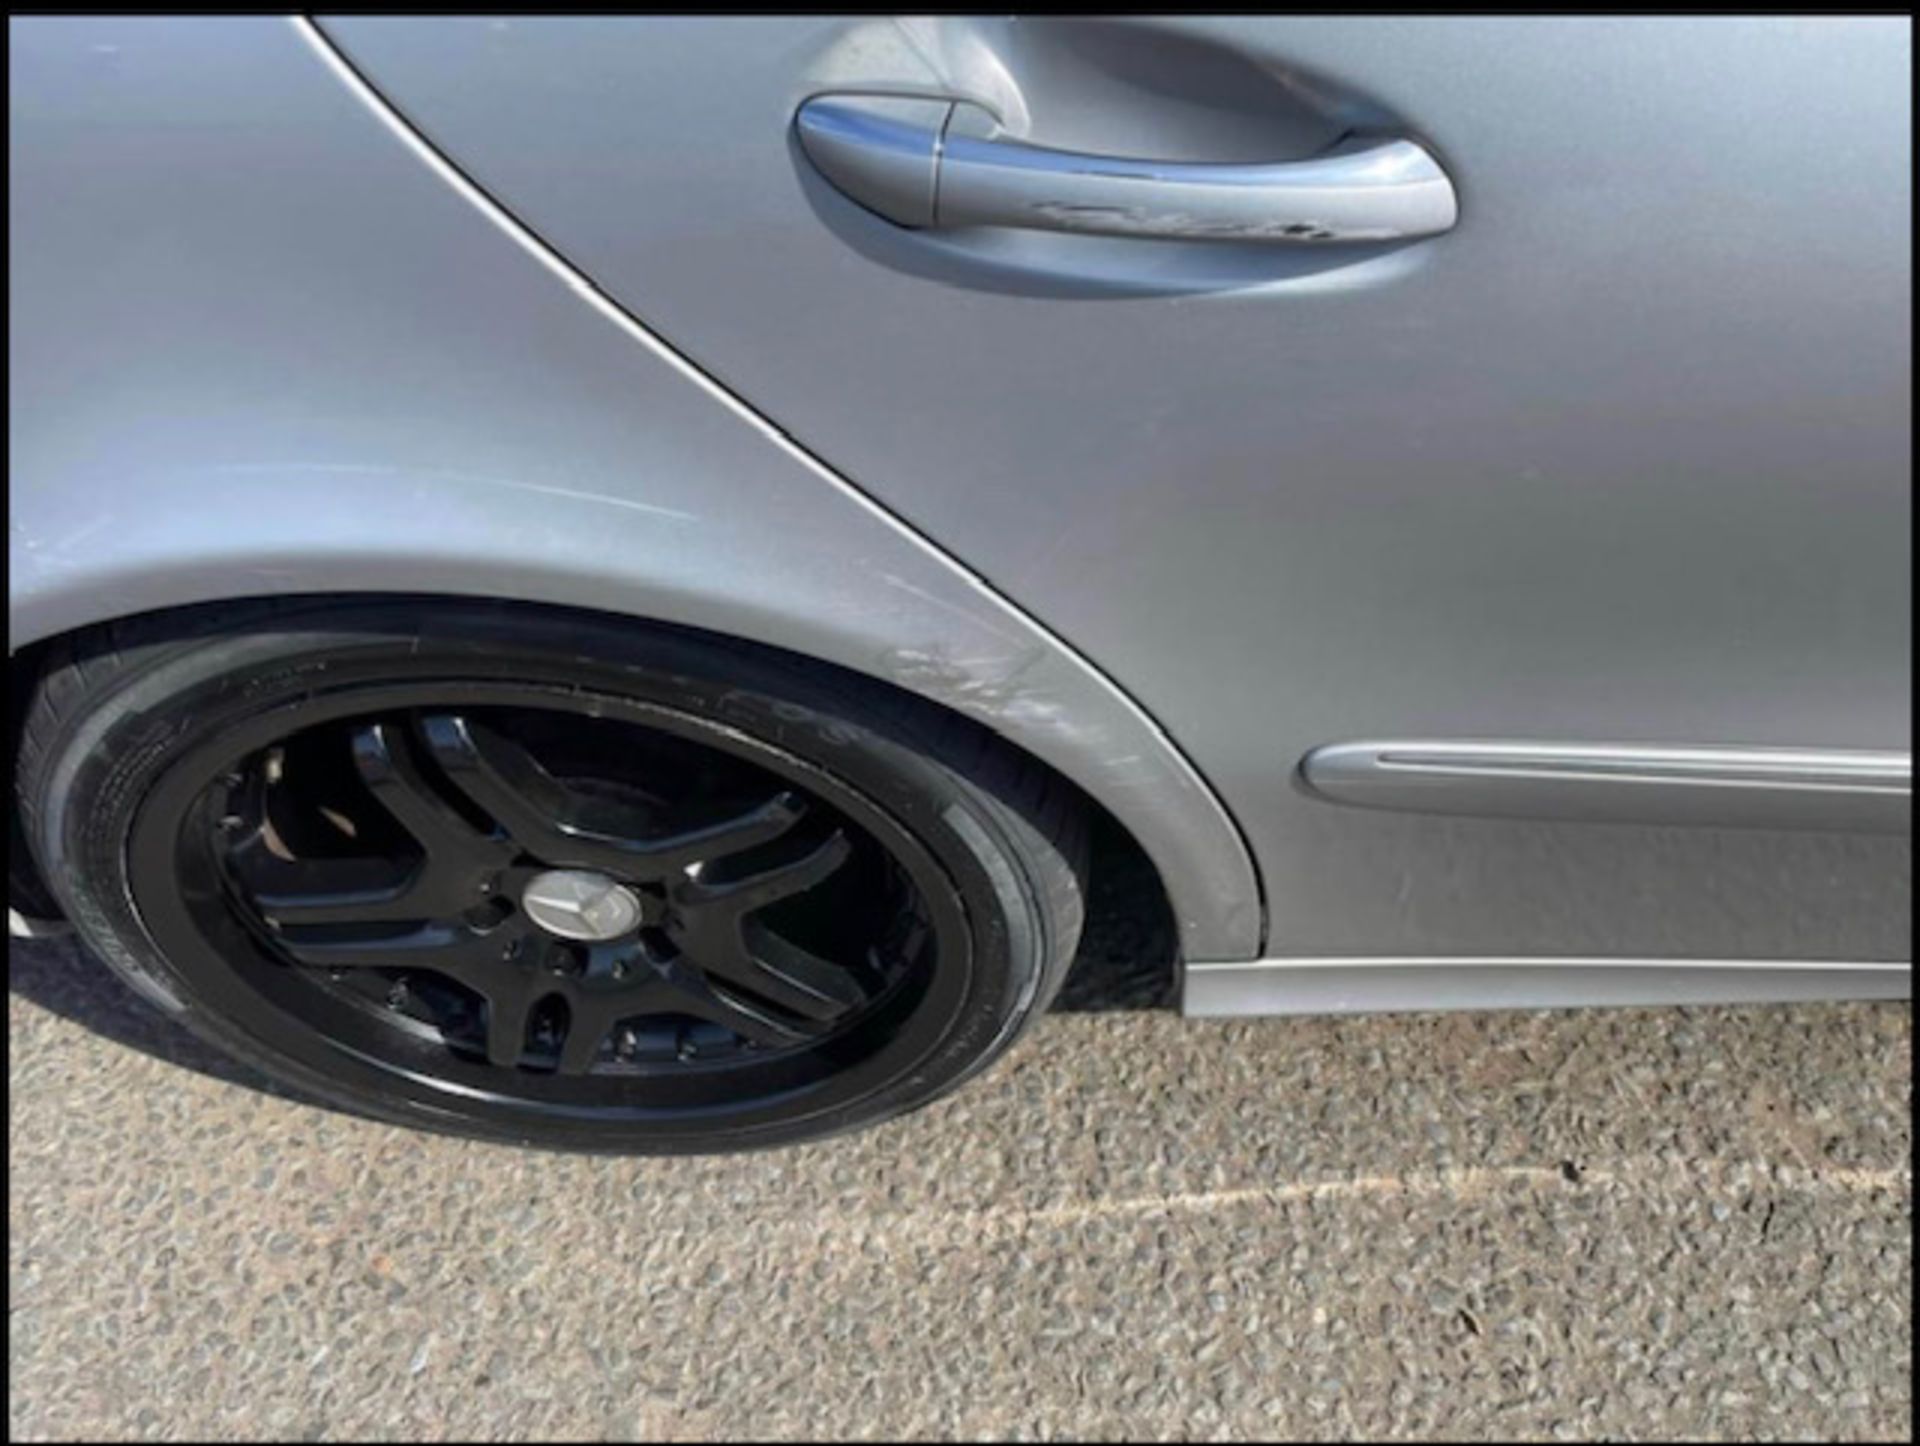 Mercedes E320 CDI 103k genuine miles ,as per pictures has scratches as shown in photos but is all in - Bild 10 aus 14